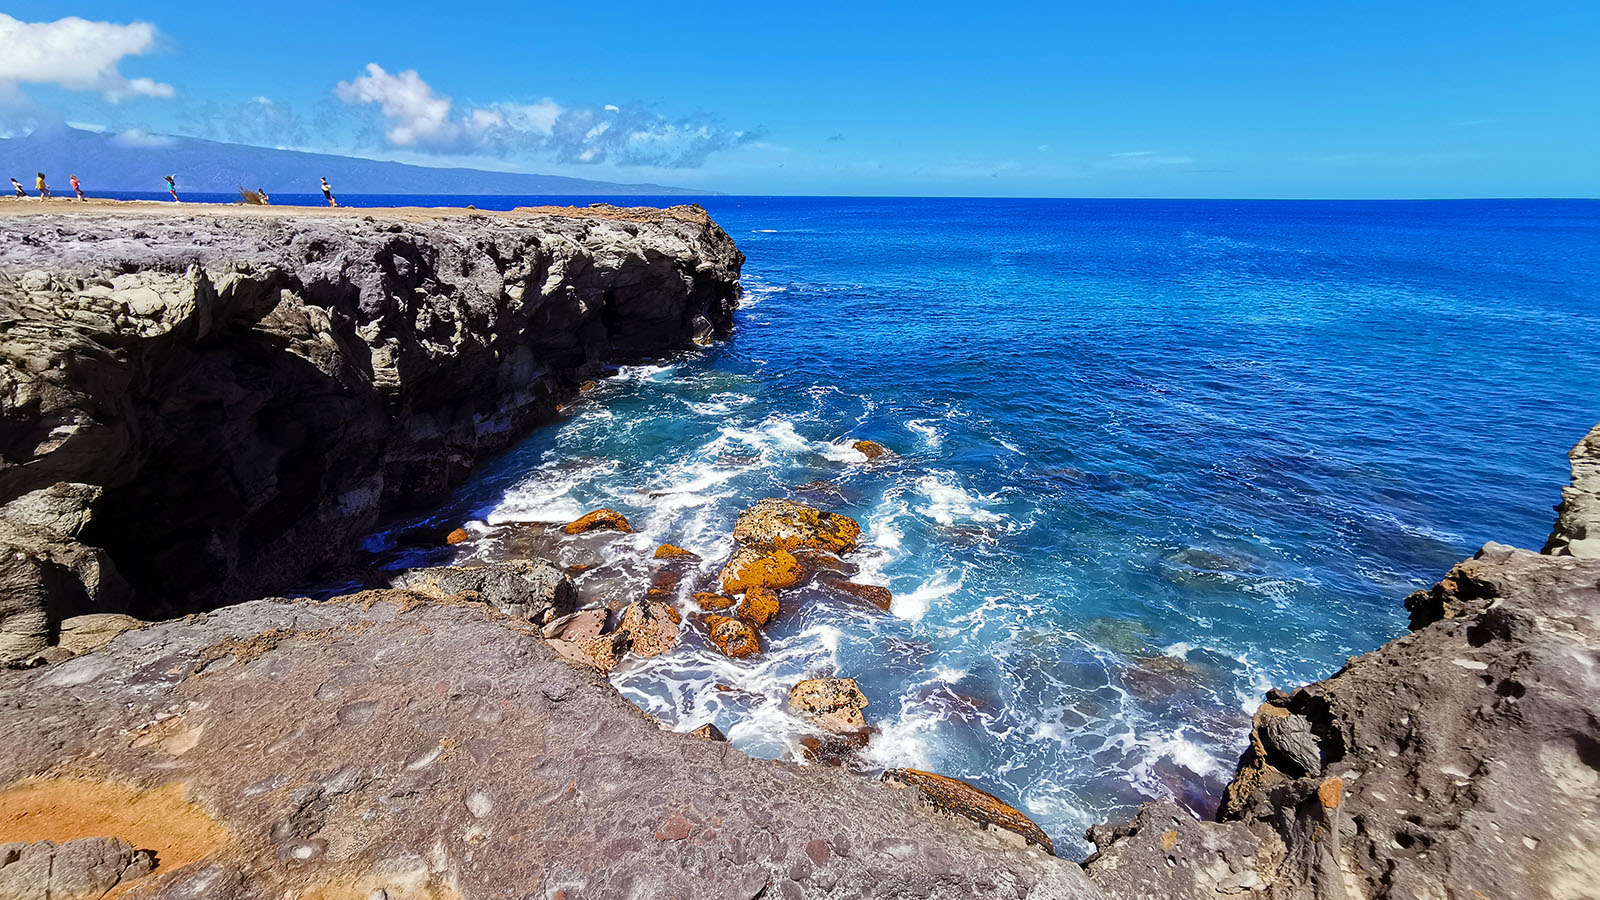 Water at Dragon's Point in Hawaii